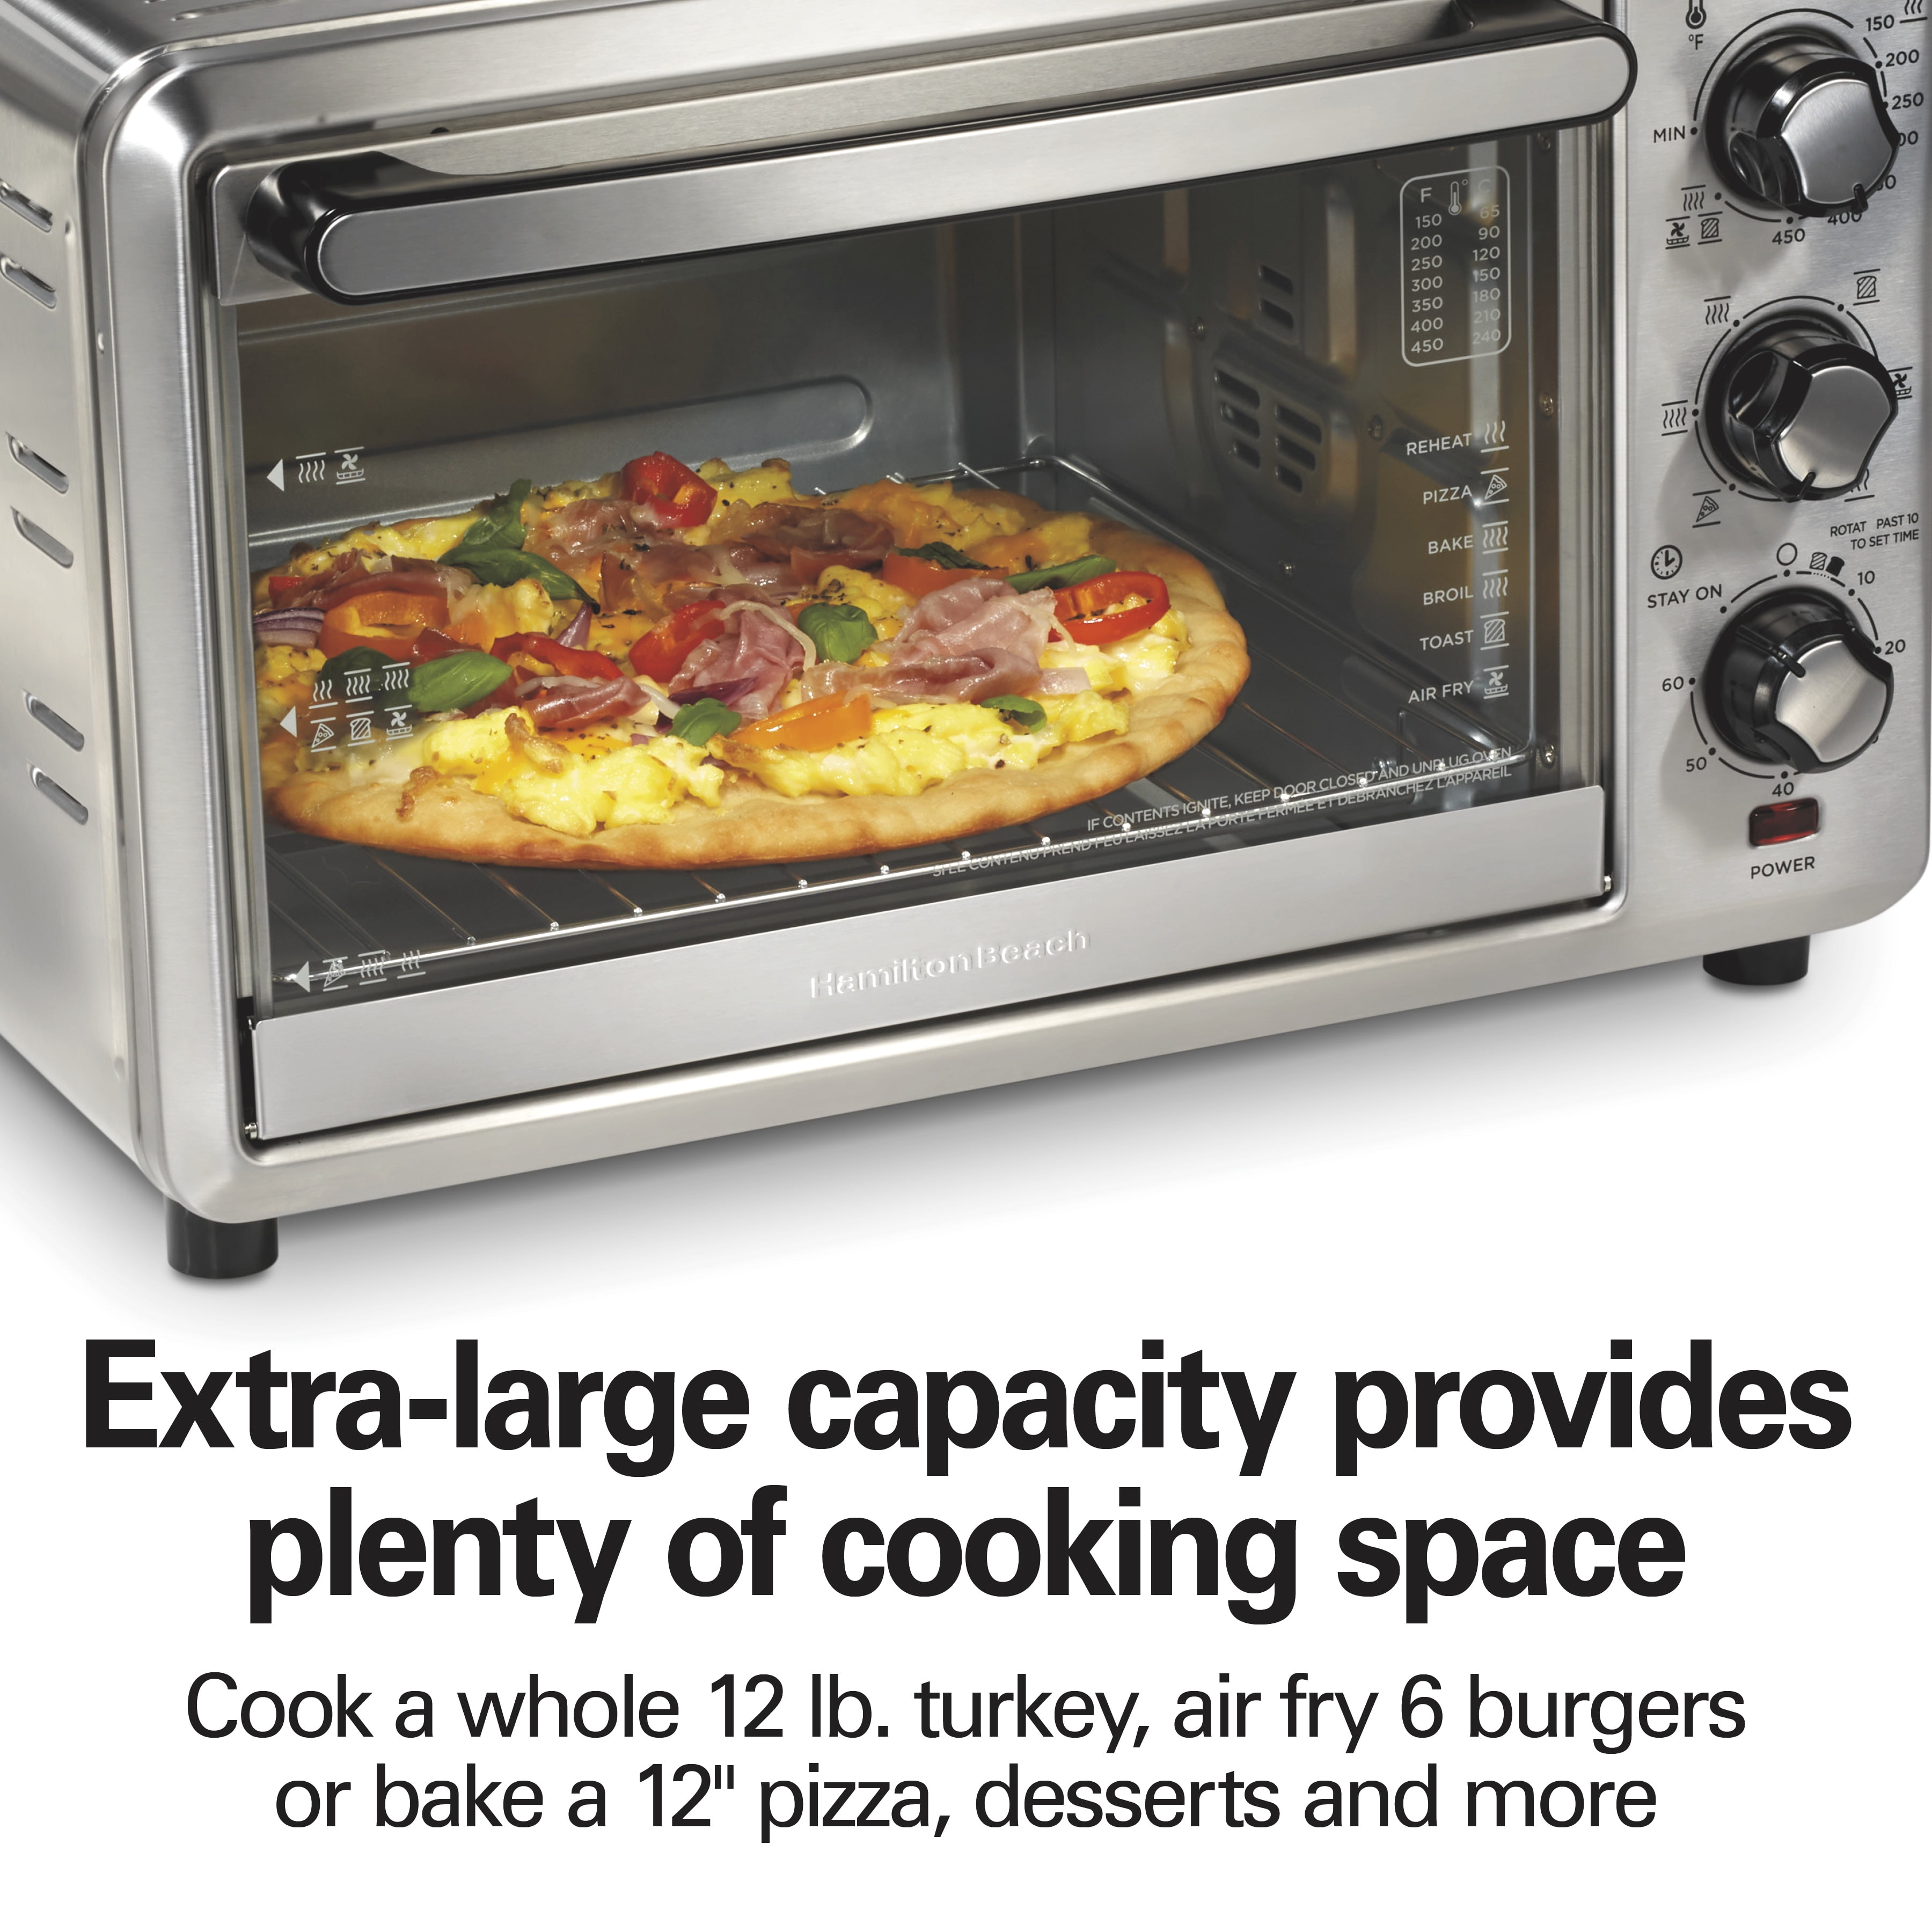 Hamilton Beach Toaster Oven Air Fryer Combo with Large Capacity, Fits 6  Slices or 12” Pizza